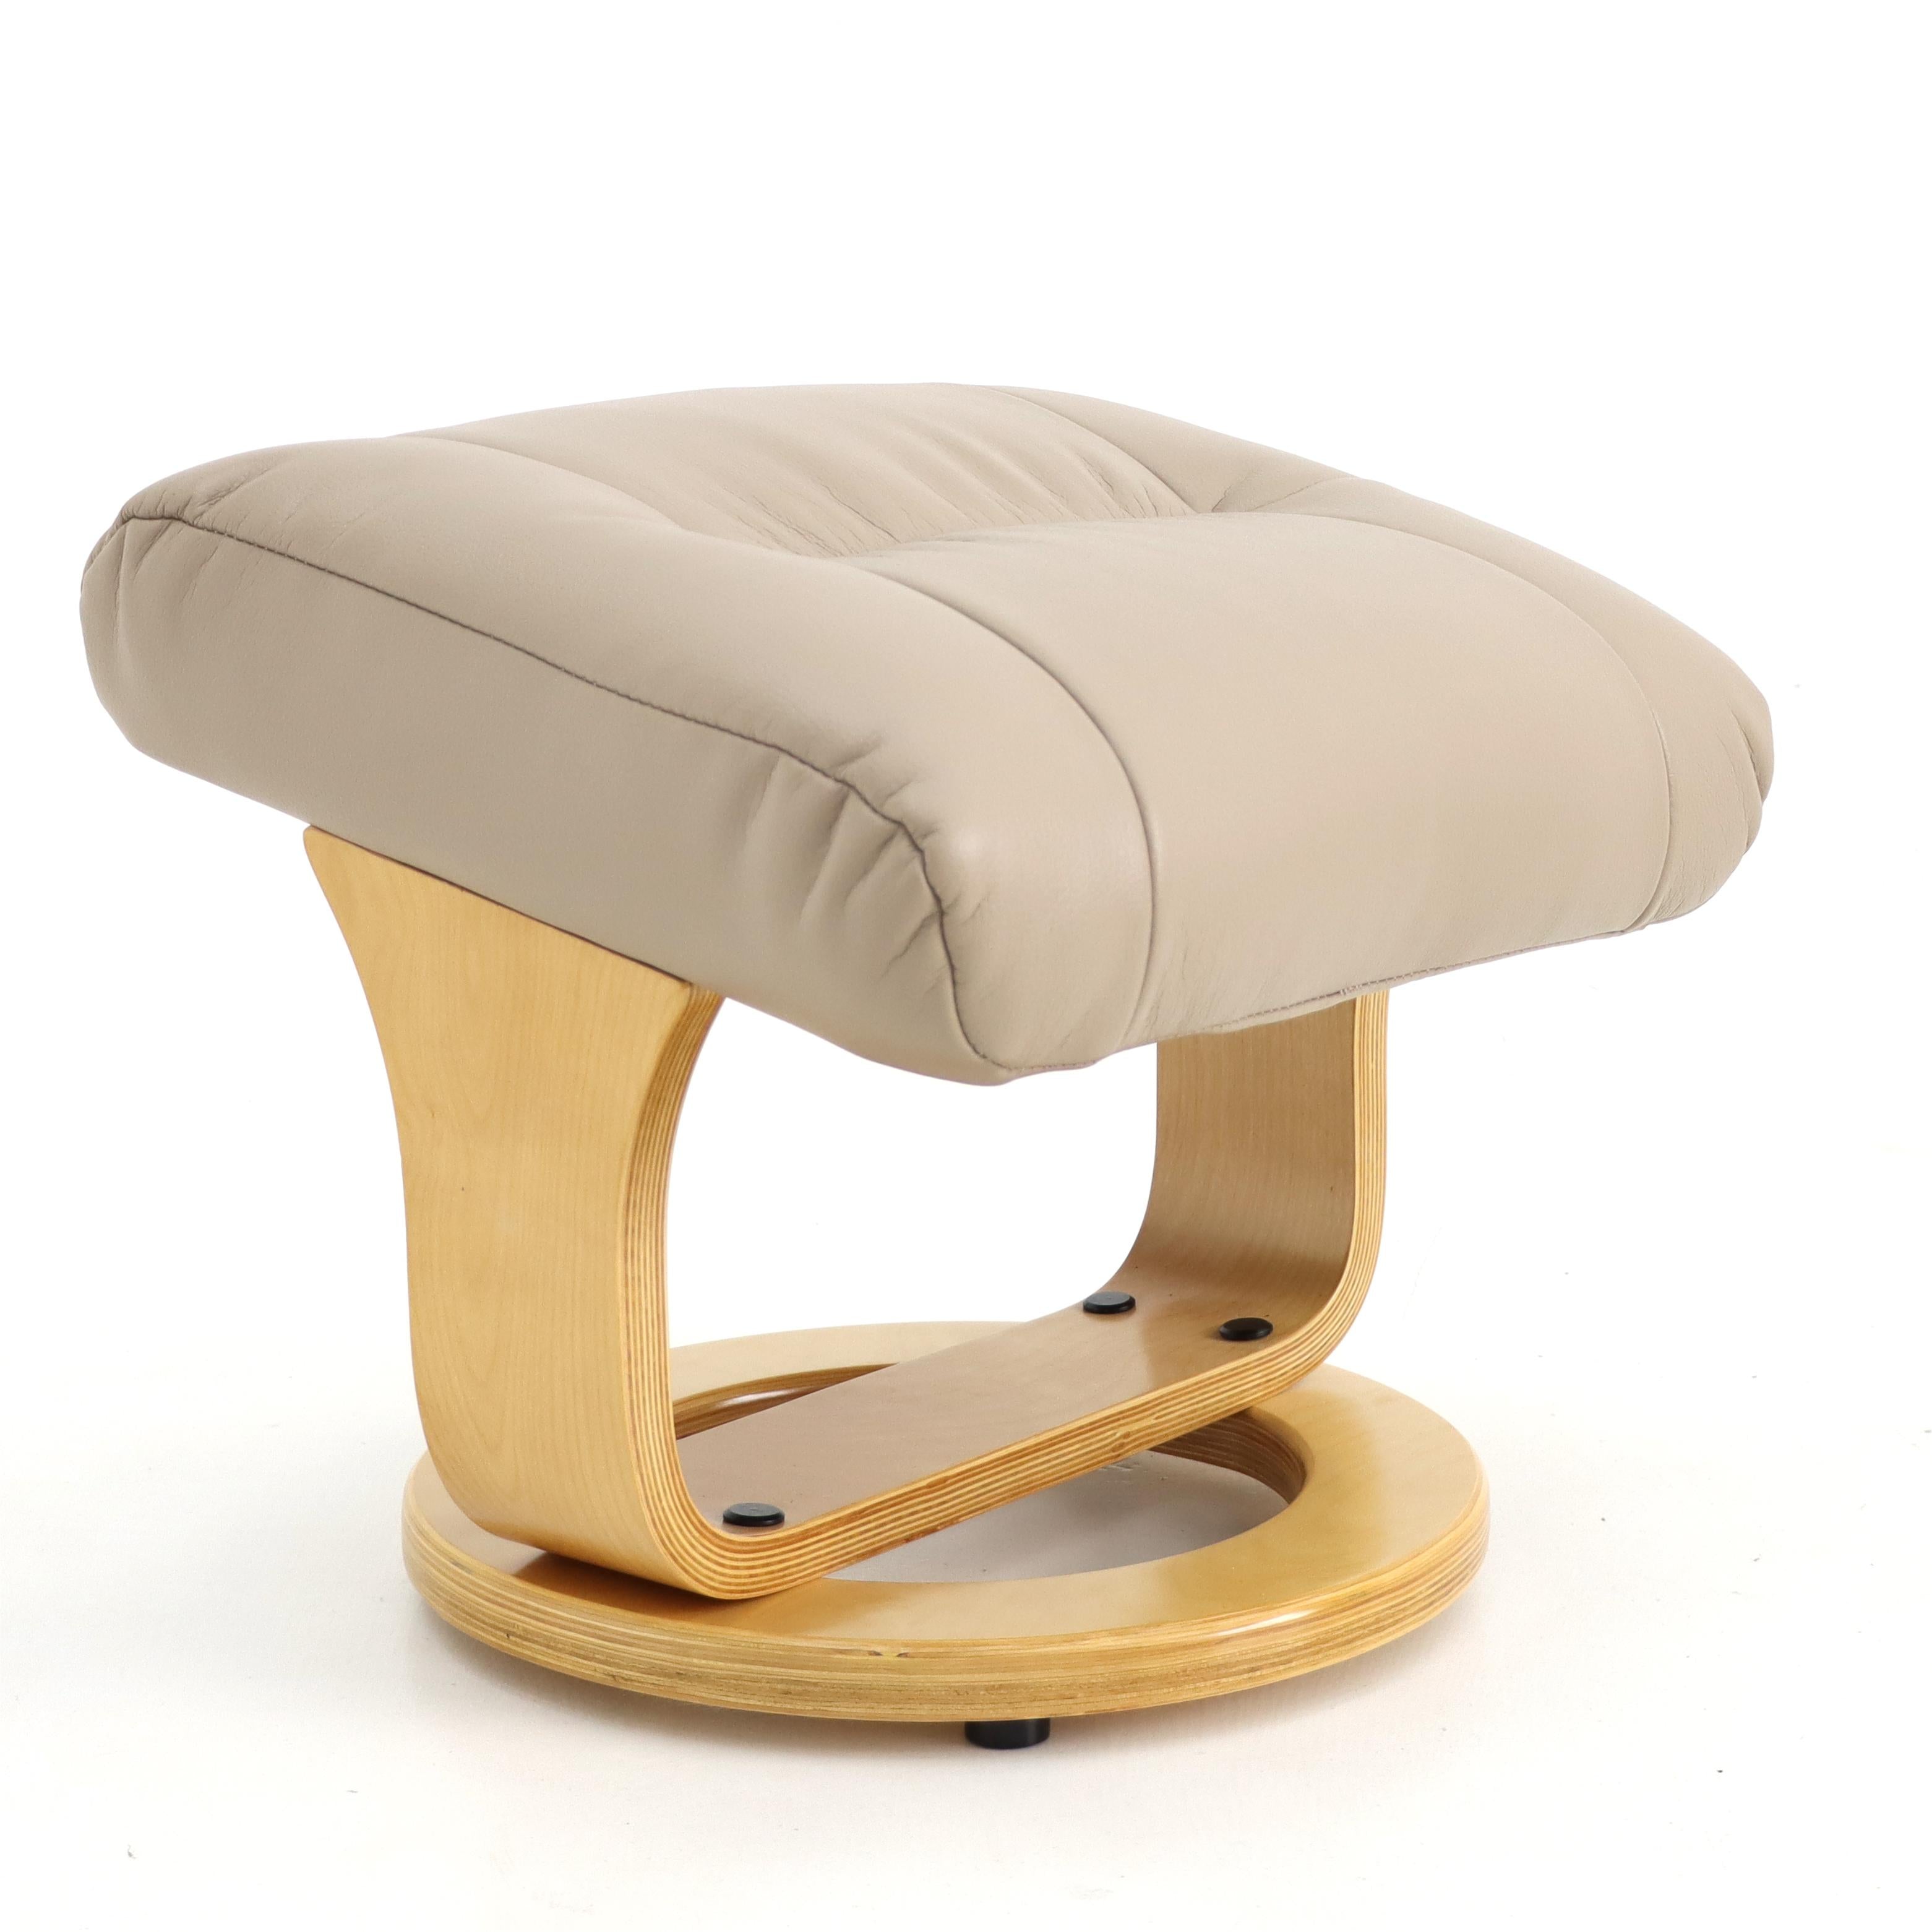 Mars Swivel Chair Taupe Leather